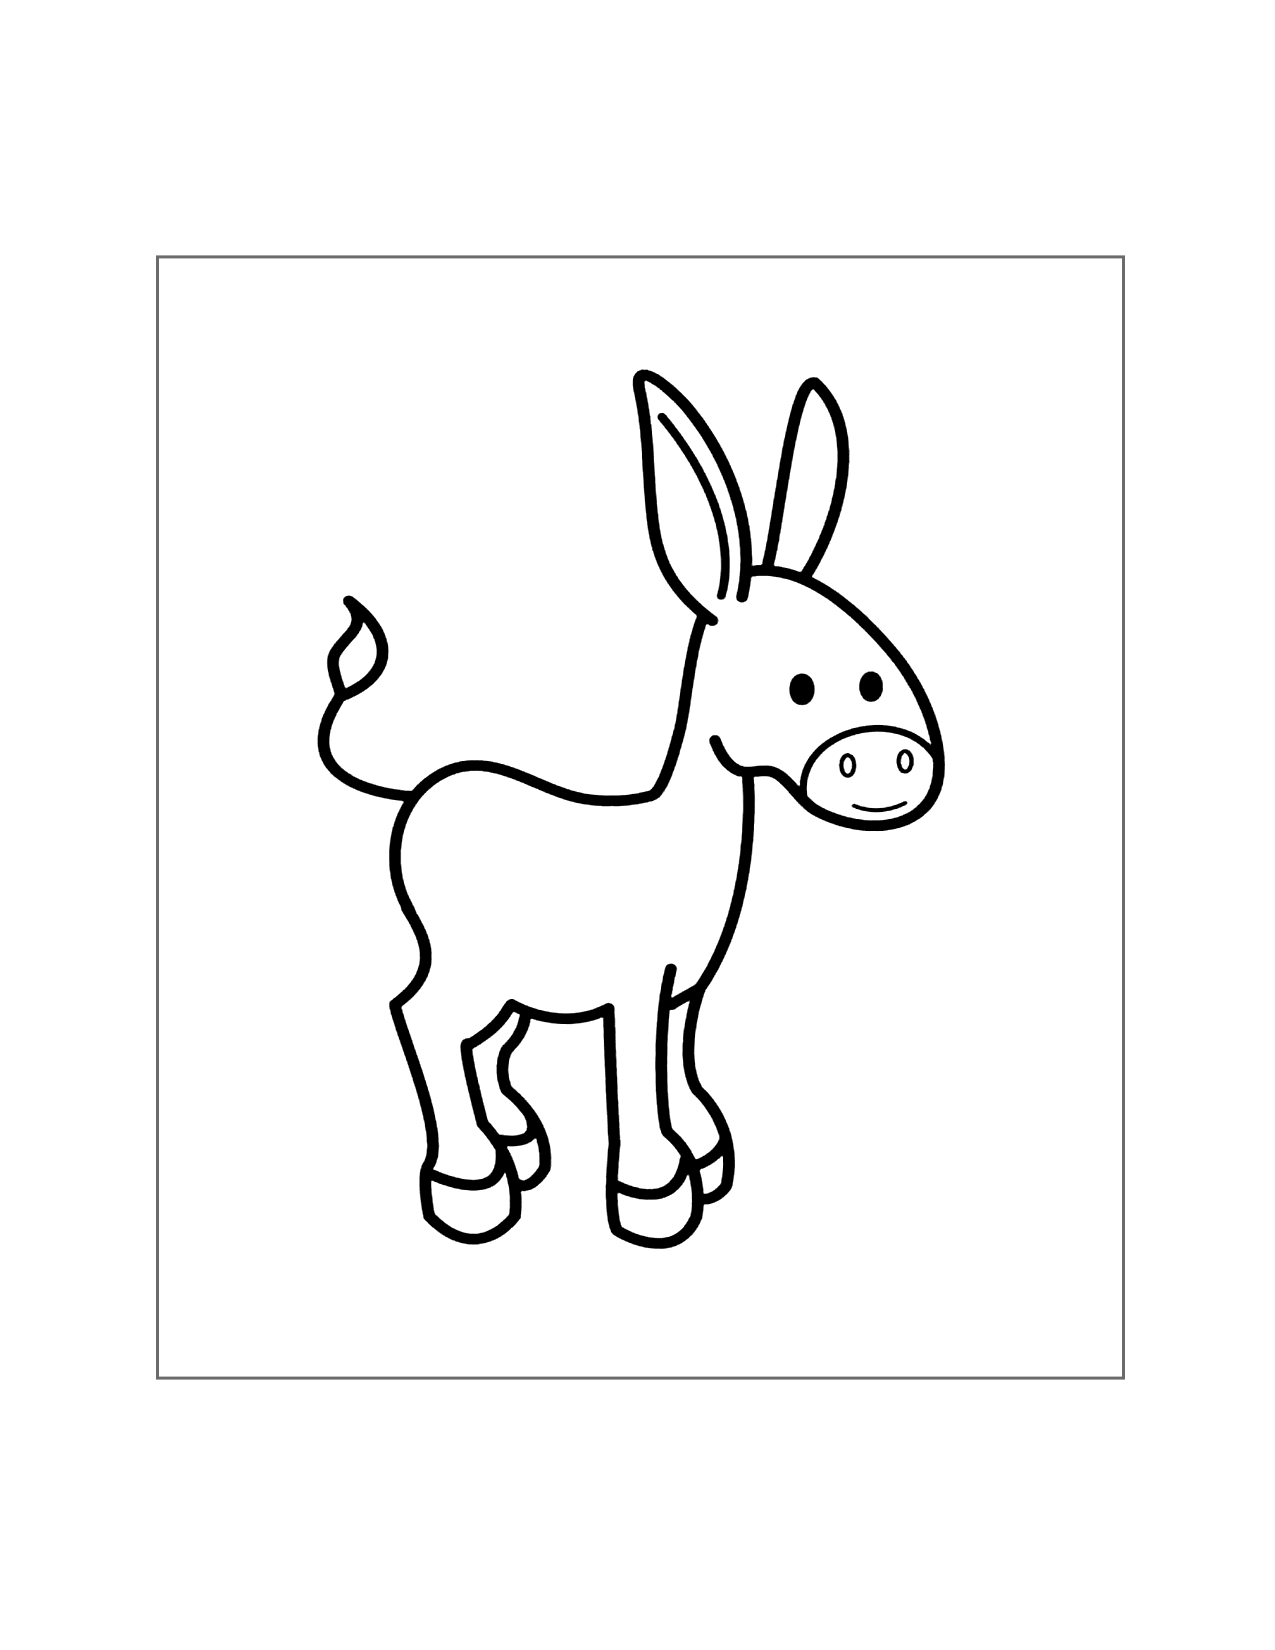 Cute Donkey Cartoon Coloring Page